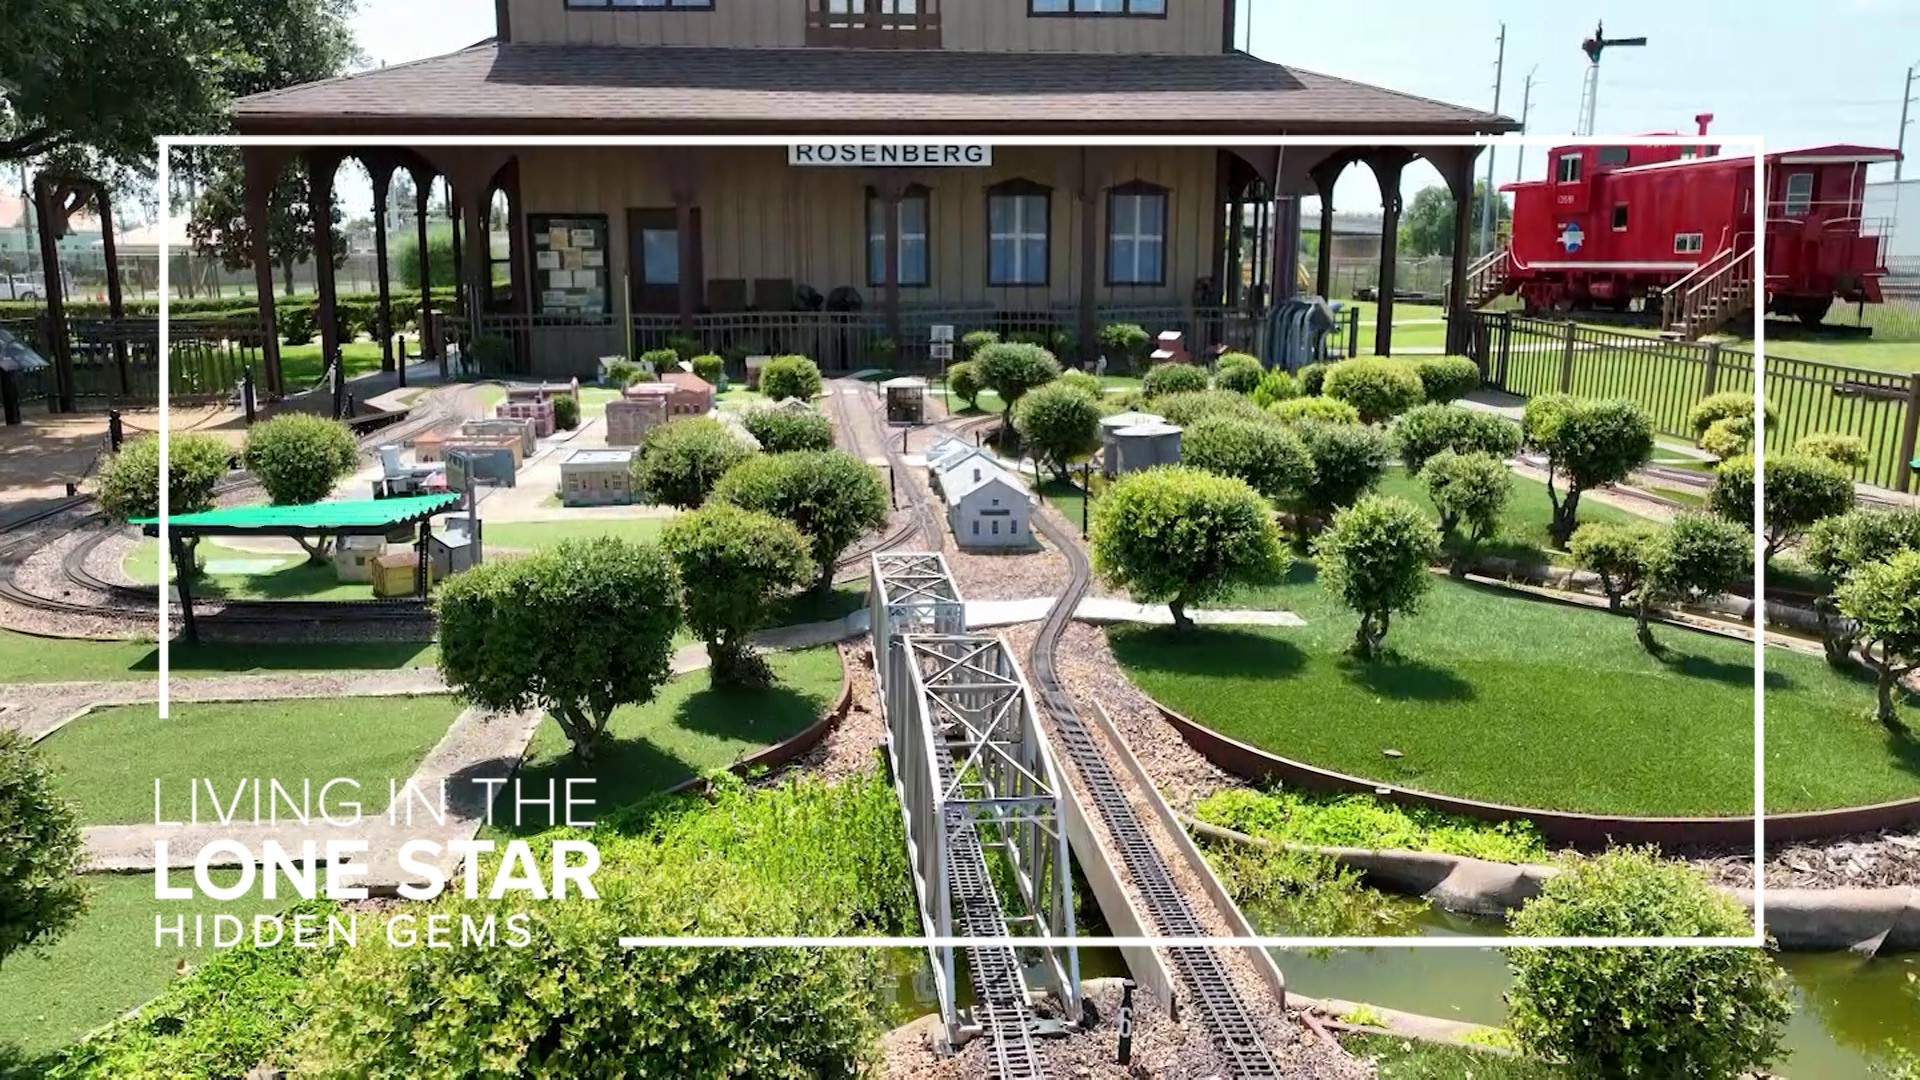 On its two acres right alongside four active railroad tracks, the Rosenberg Railroad Museum uses a variety of spaces to bring the history of railroading to life.